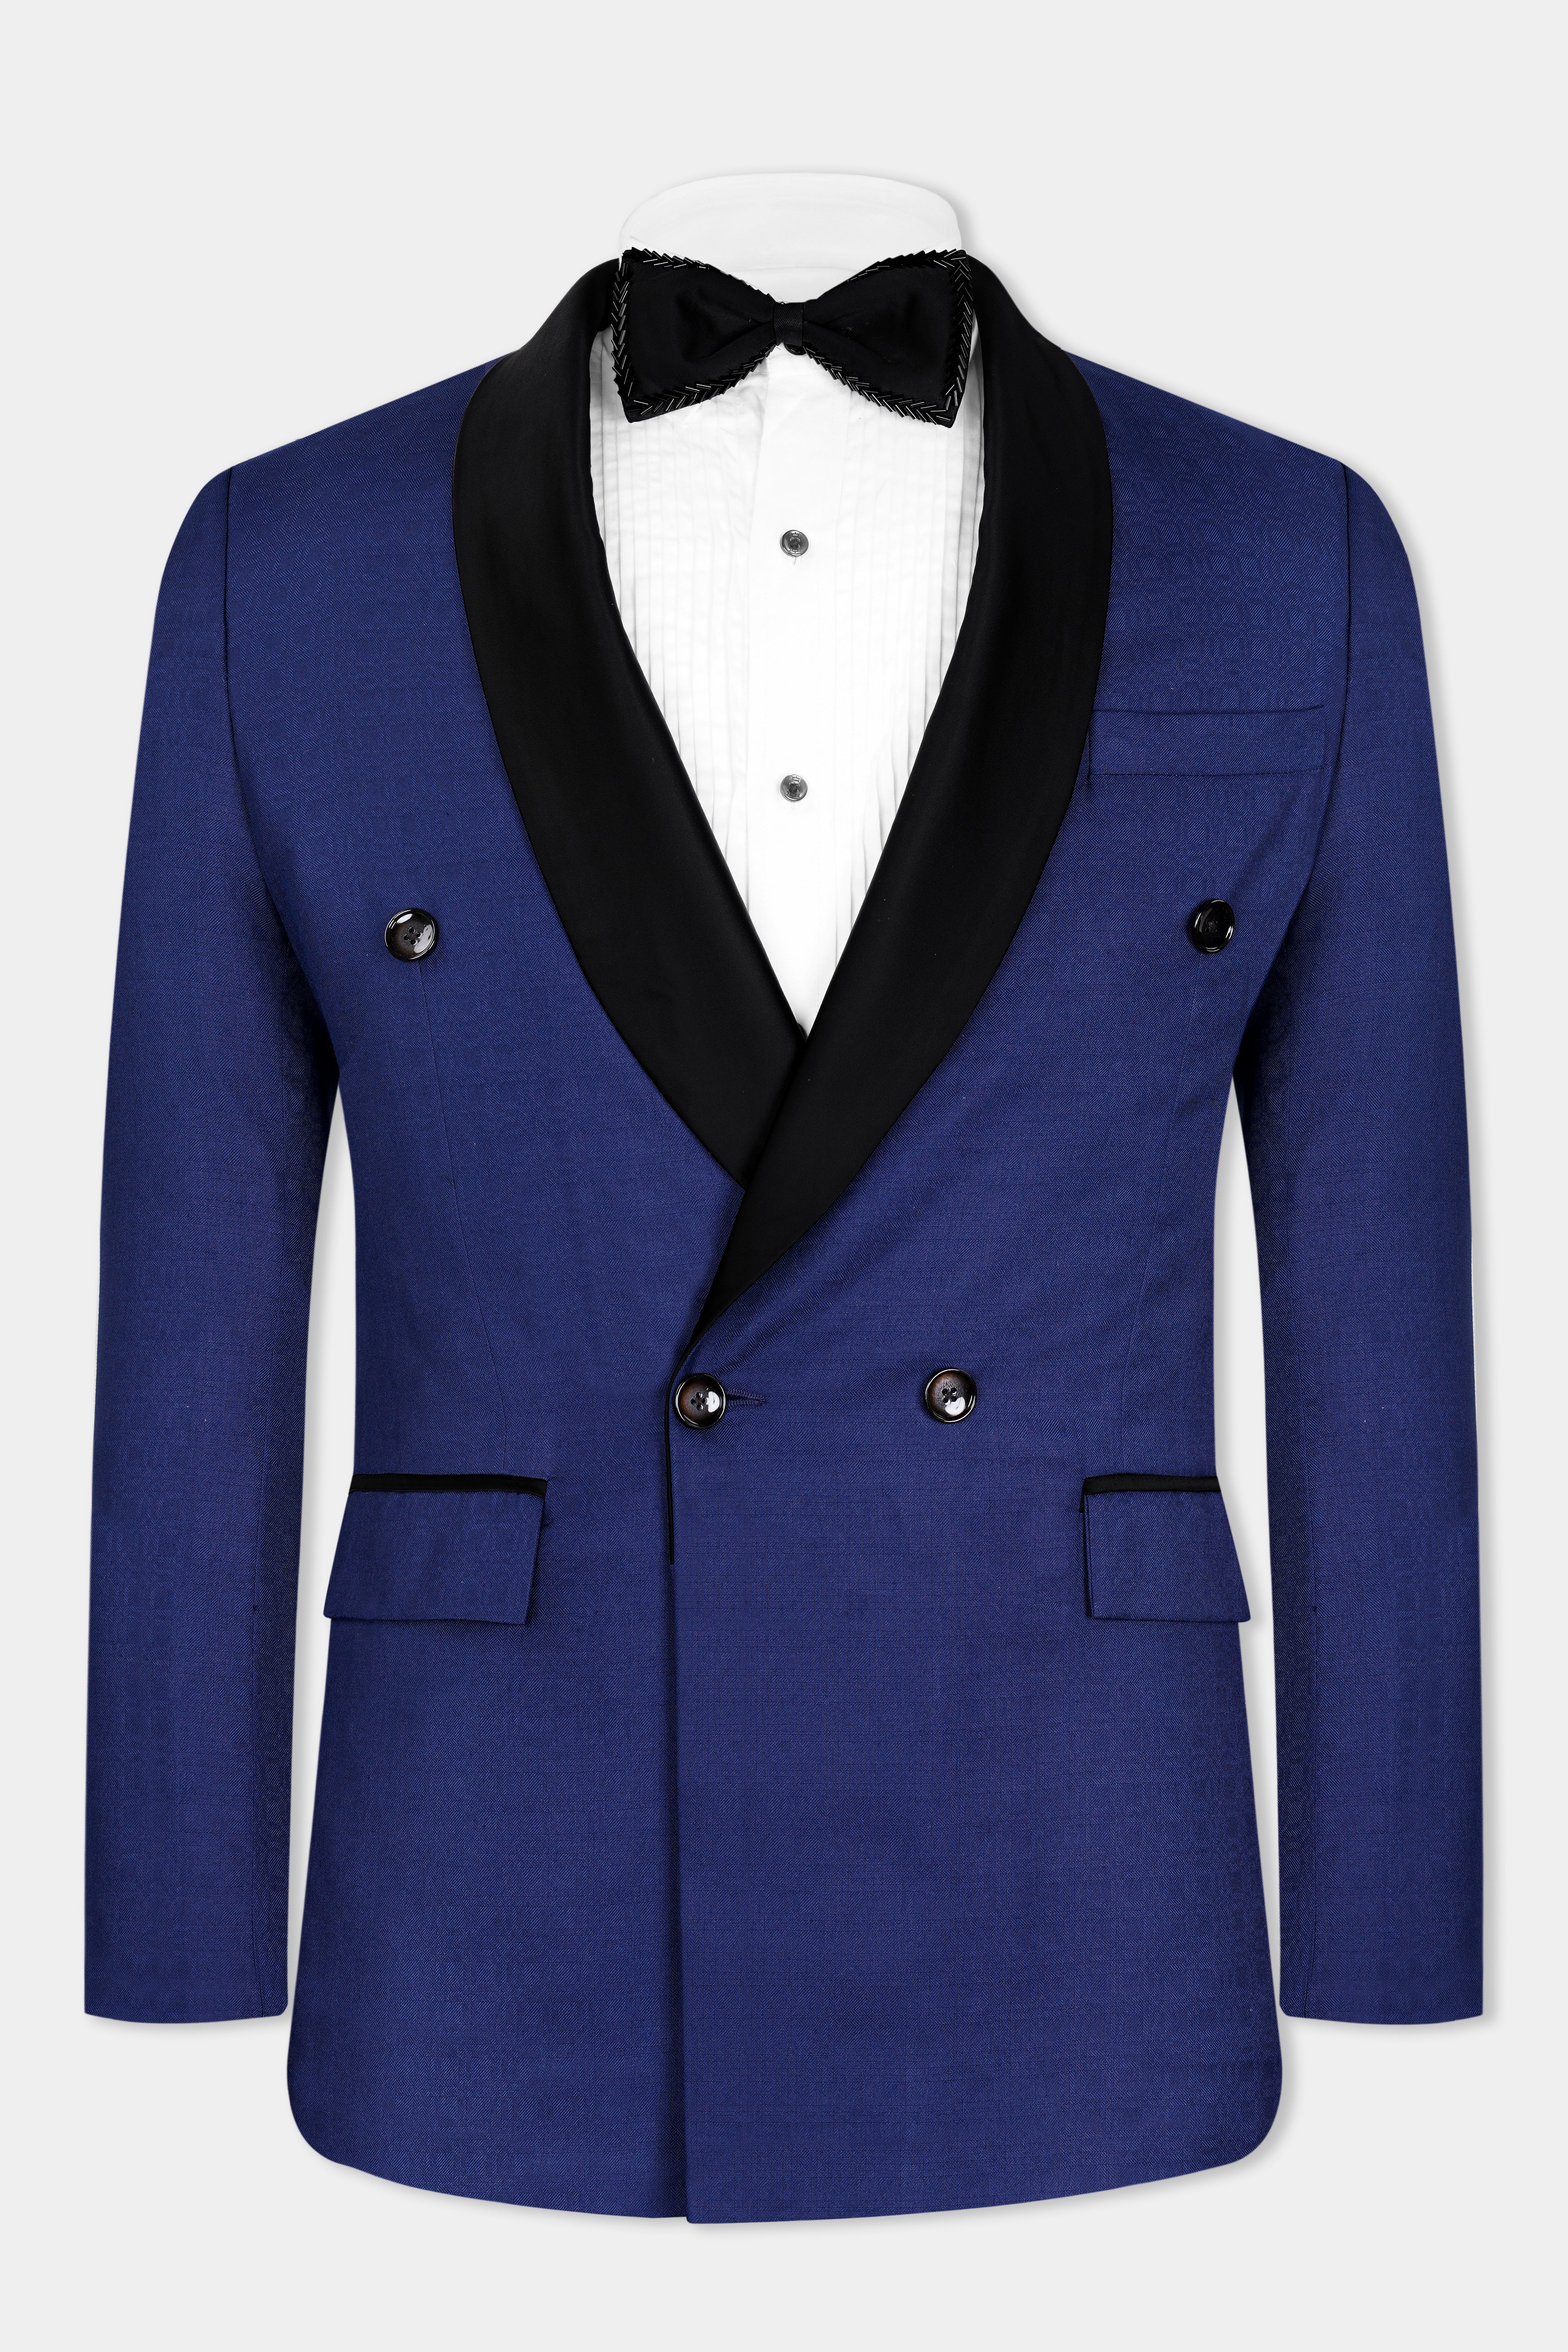 Cloud Burst Blue Wool Rich Double Breasted Tuxedo Designer Blazer BL2946-DB-D6-36, BL2946-DB-D6-38, BL2946-DB-D6-40, BL2946-DB-D6-42, BL2946-DB-D6-44, BL2946-DB-D6-46, BL2946-DB-D6-48, BL2946-DB-D6-50, BL2946-DB-D6-52, BL2946-DB-D6-54, BL2946-DB-D6-56, BL2946-DB-D6-58, BL2946-DB-D6-60